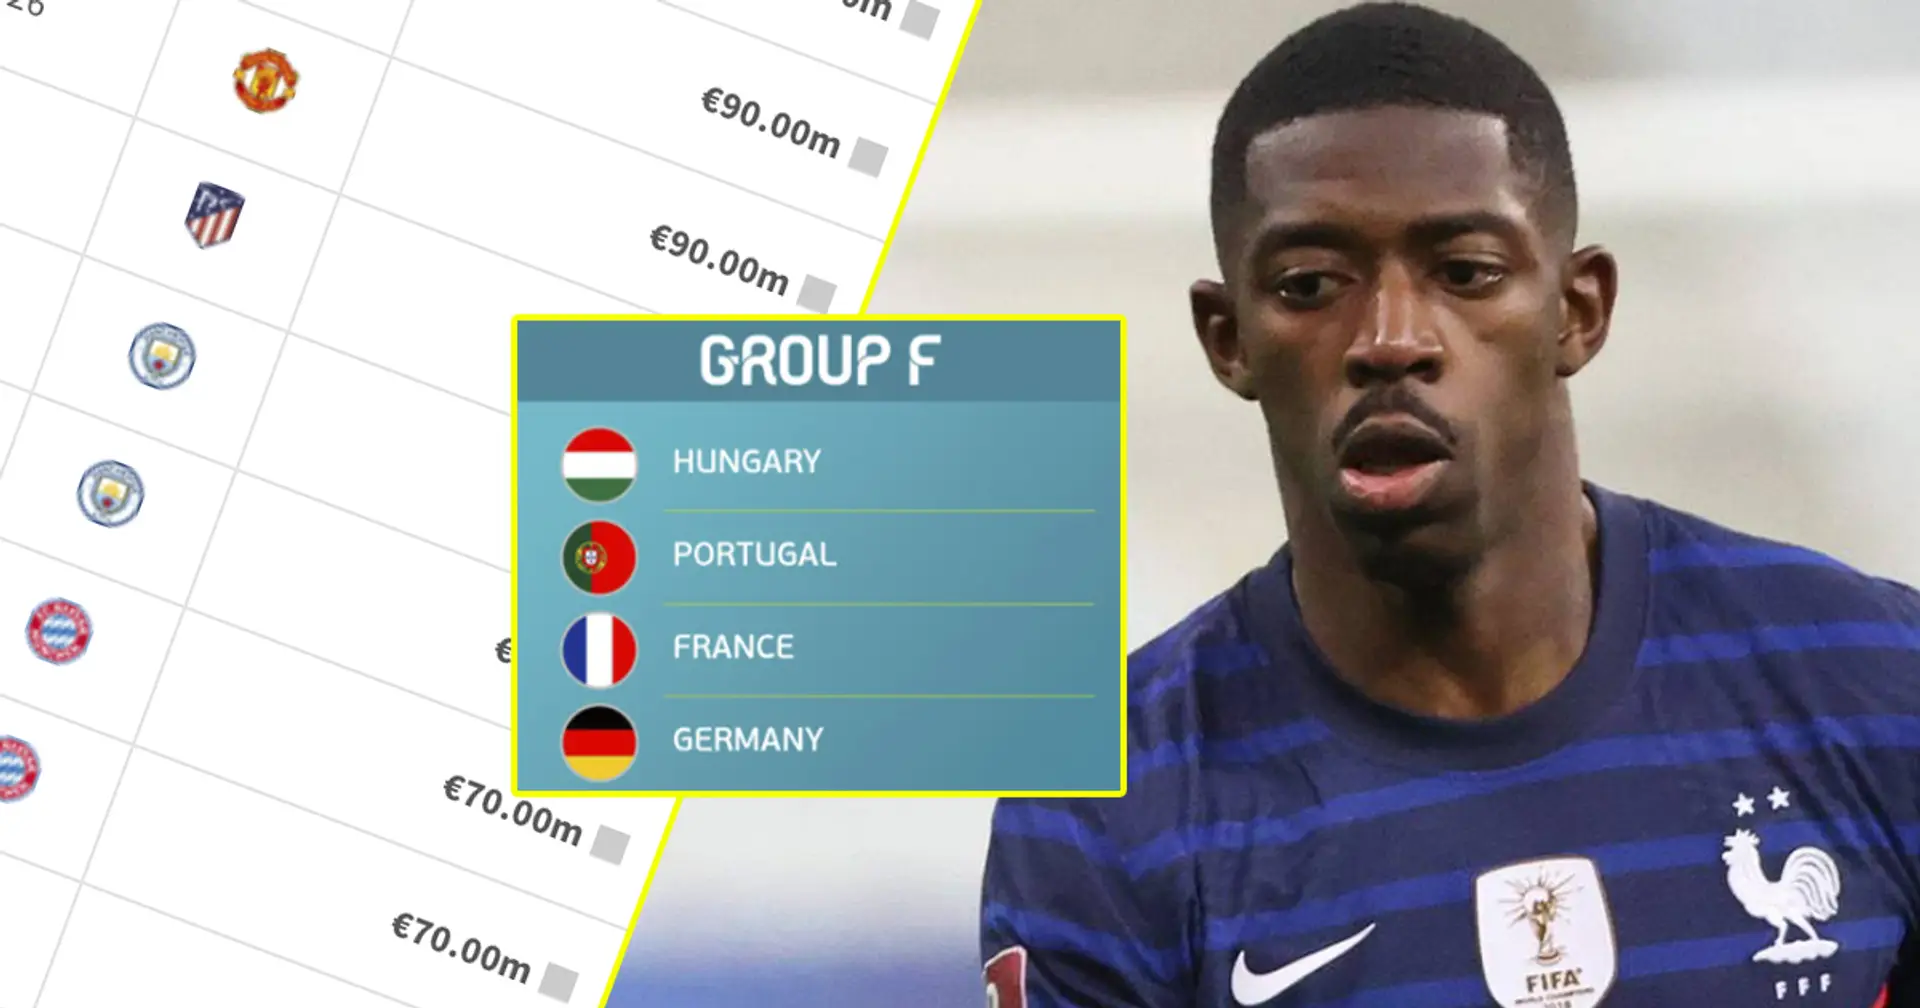 2 Barca players in Euro 2020 group of death top 20 ranked by market value